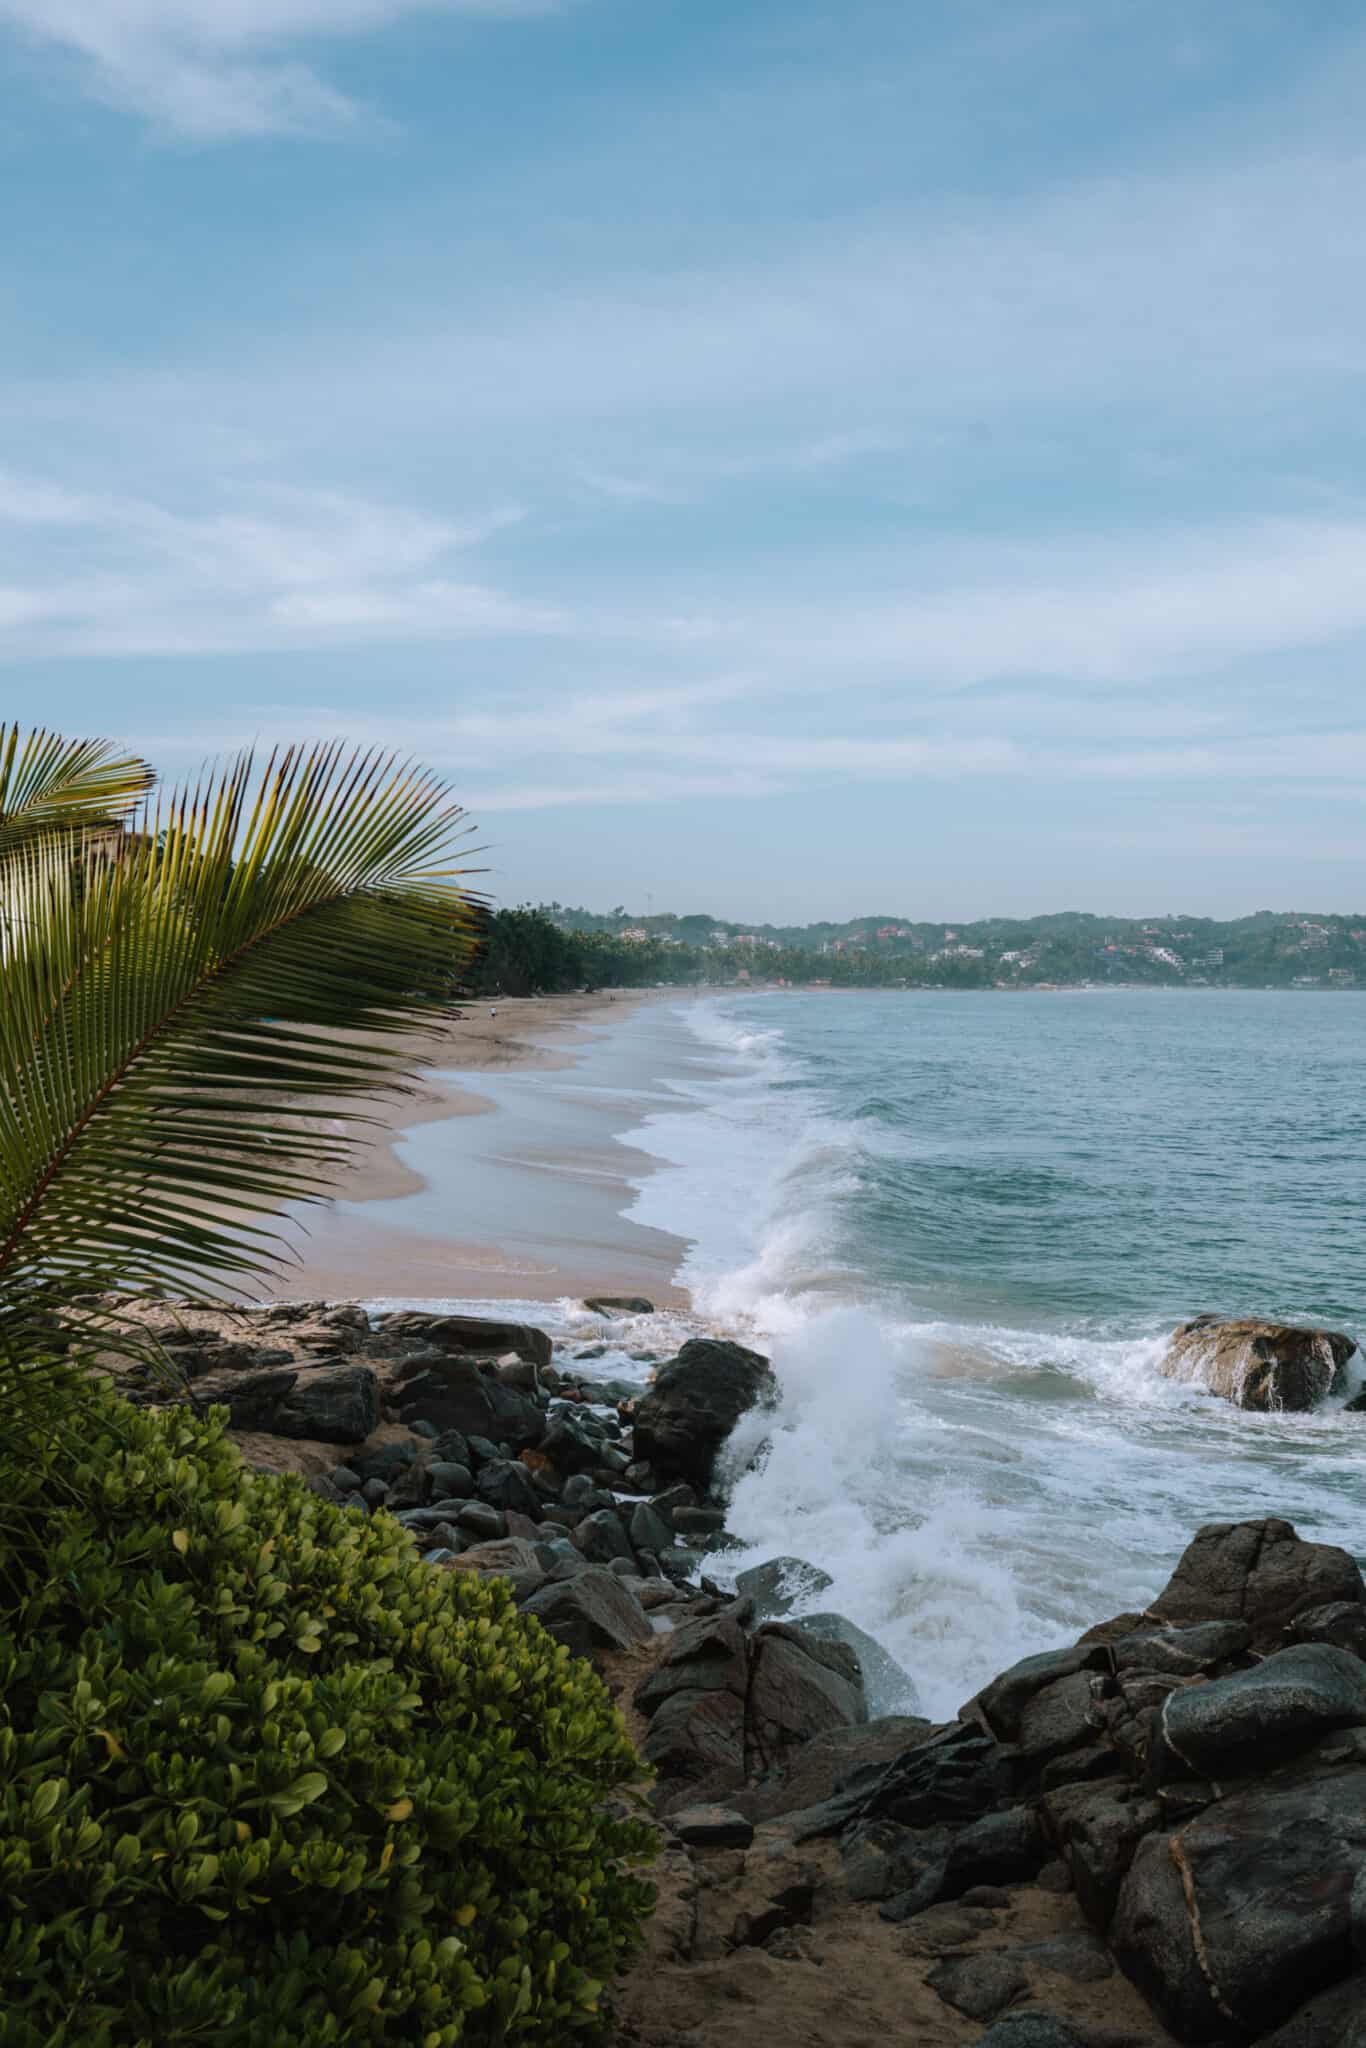 A Sayulita beach with palm trees and rocks in the background.